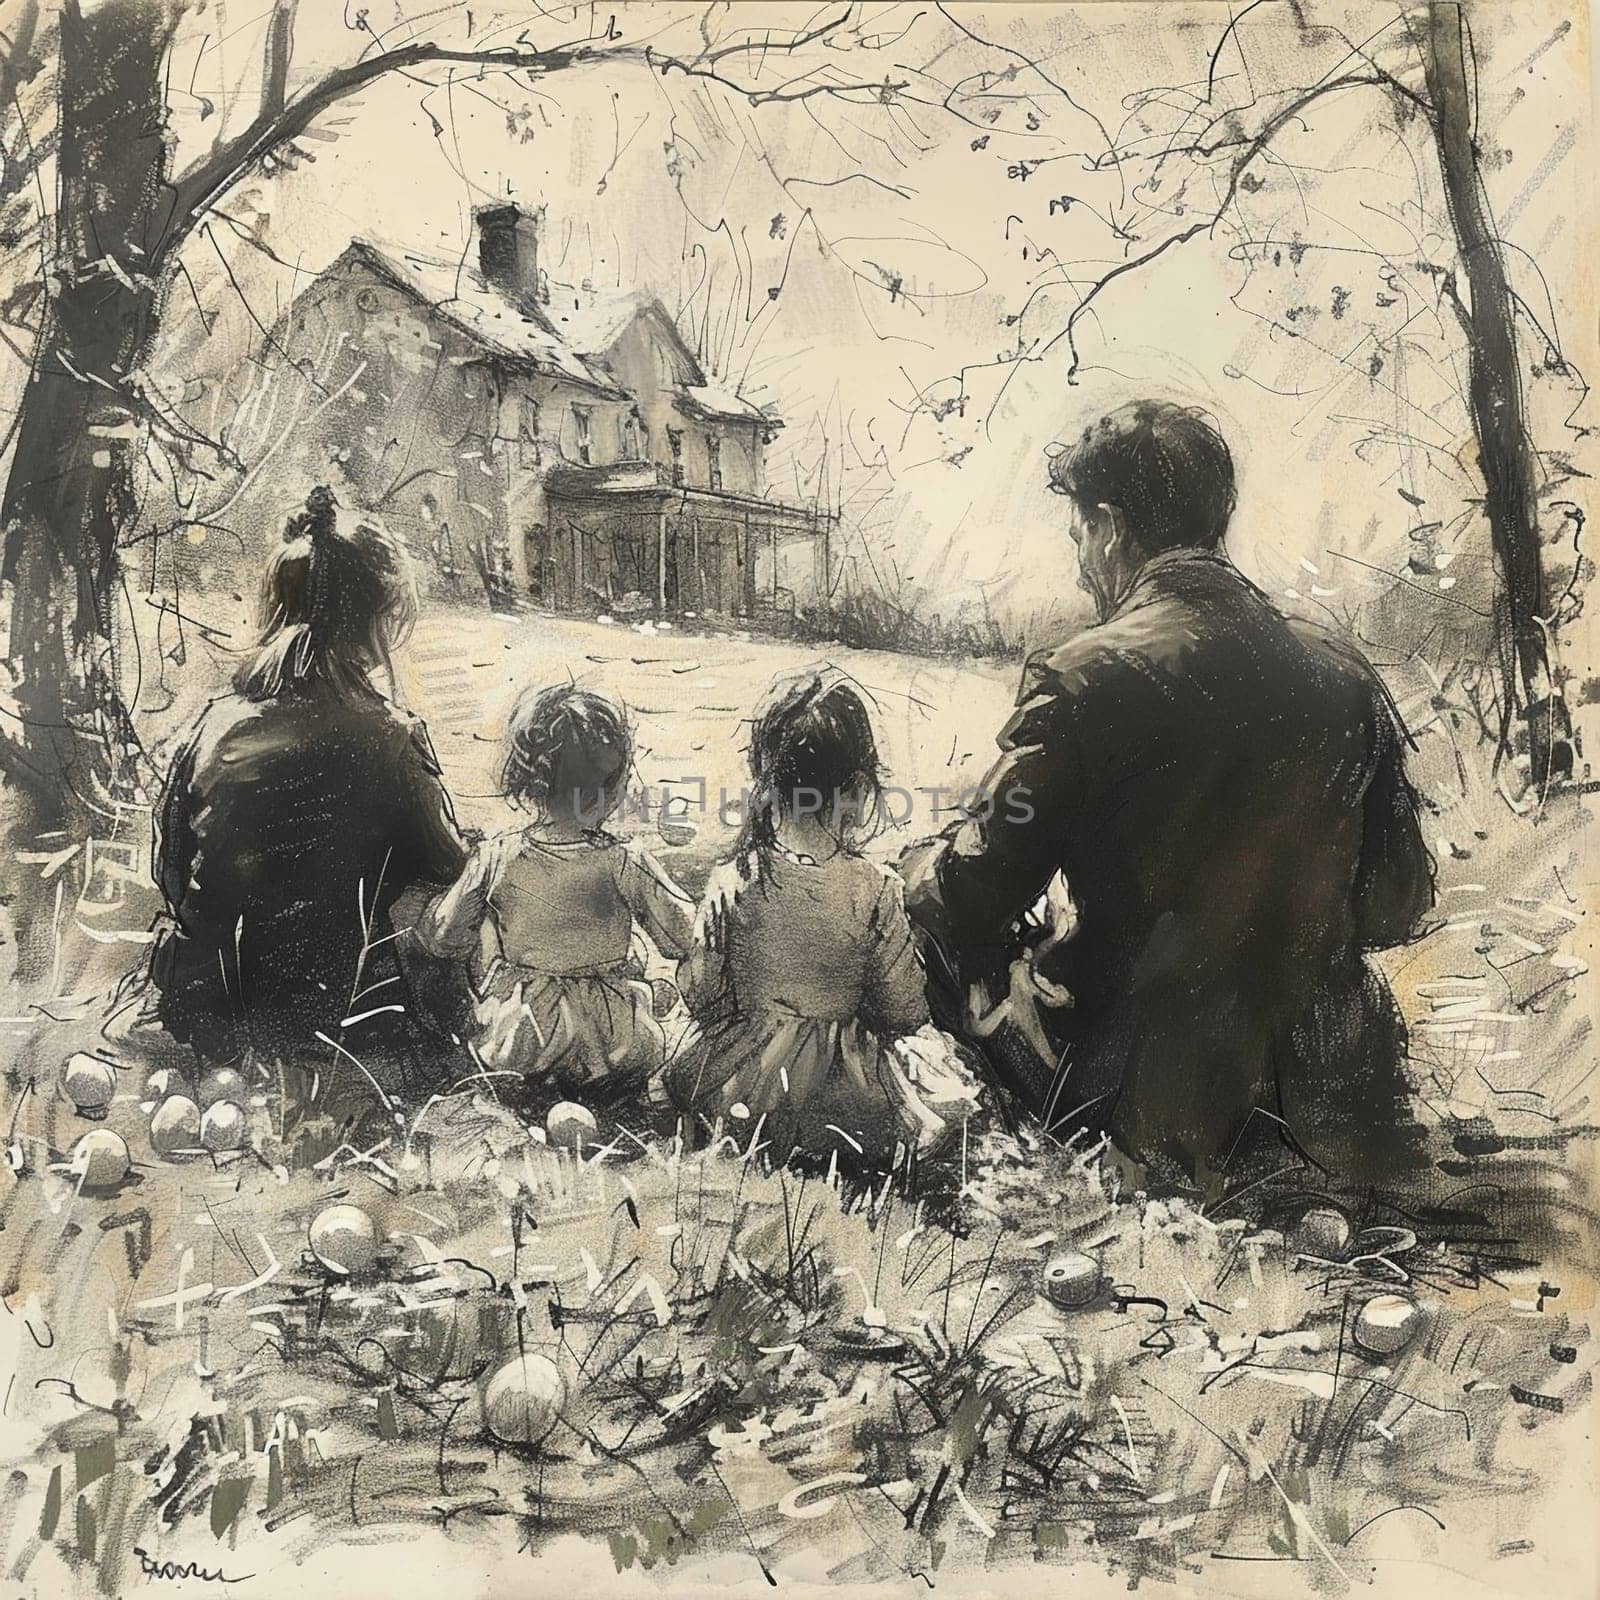 Charcoal sketch of peaceful Easter morning with family finding eggs in their garden